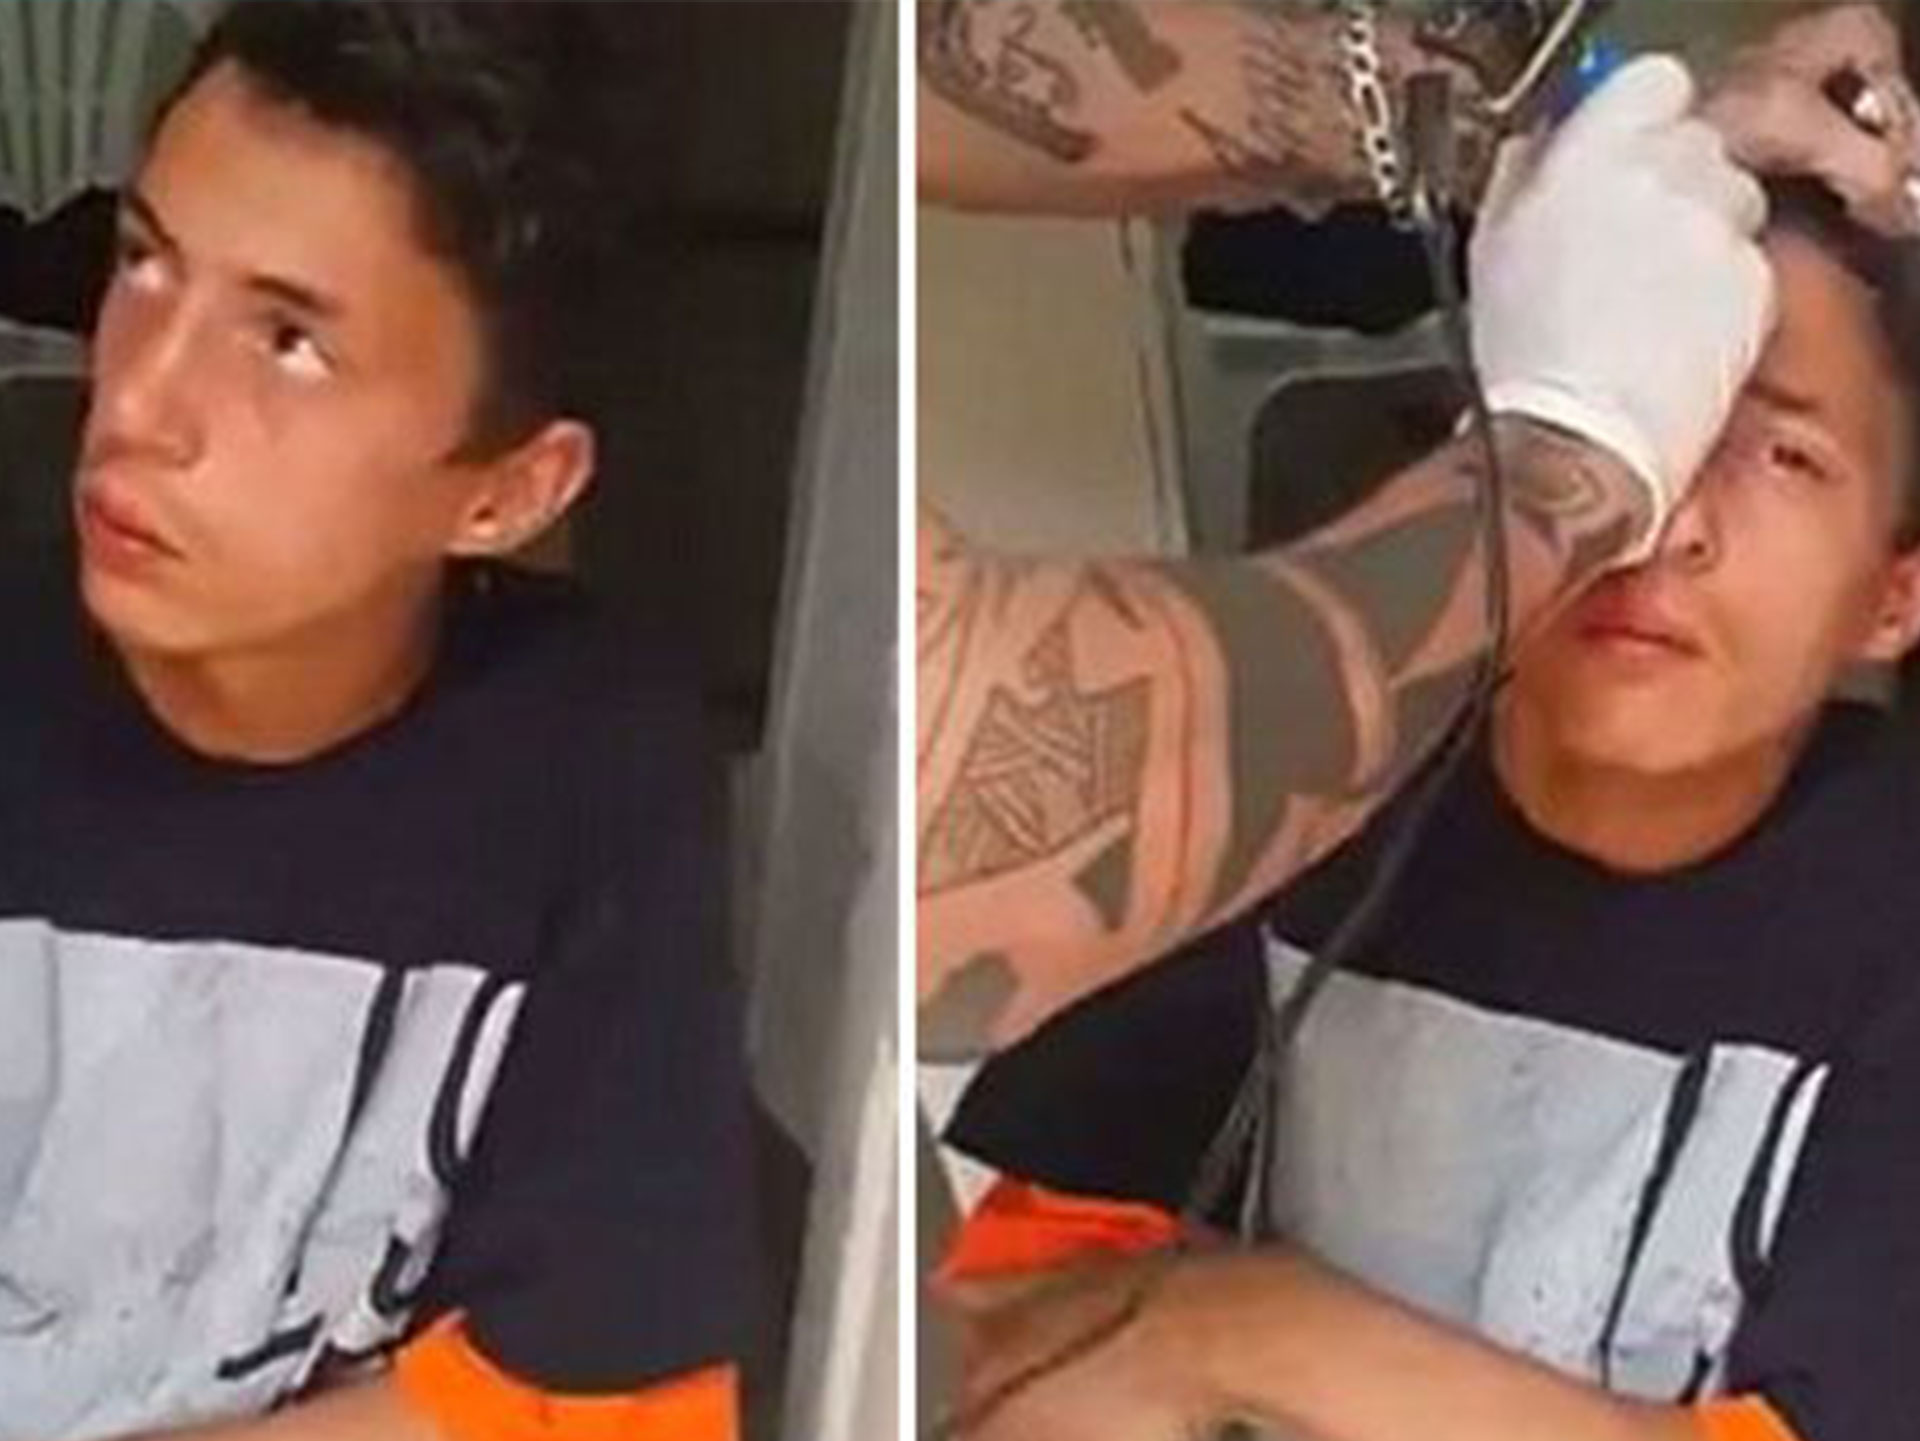 Men charged with torture after tattooing teenager’s forehead tattooed with “loser” and “thief”